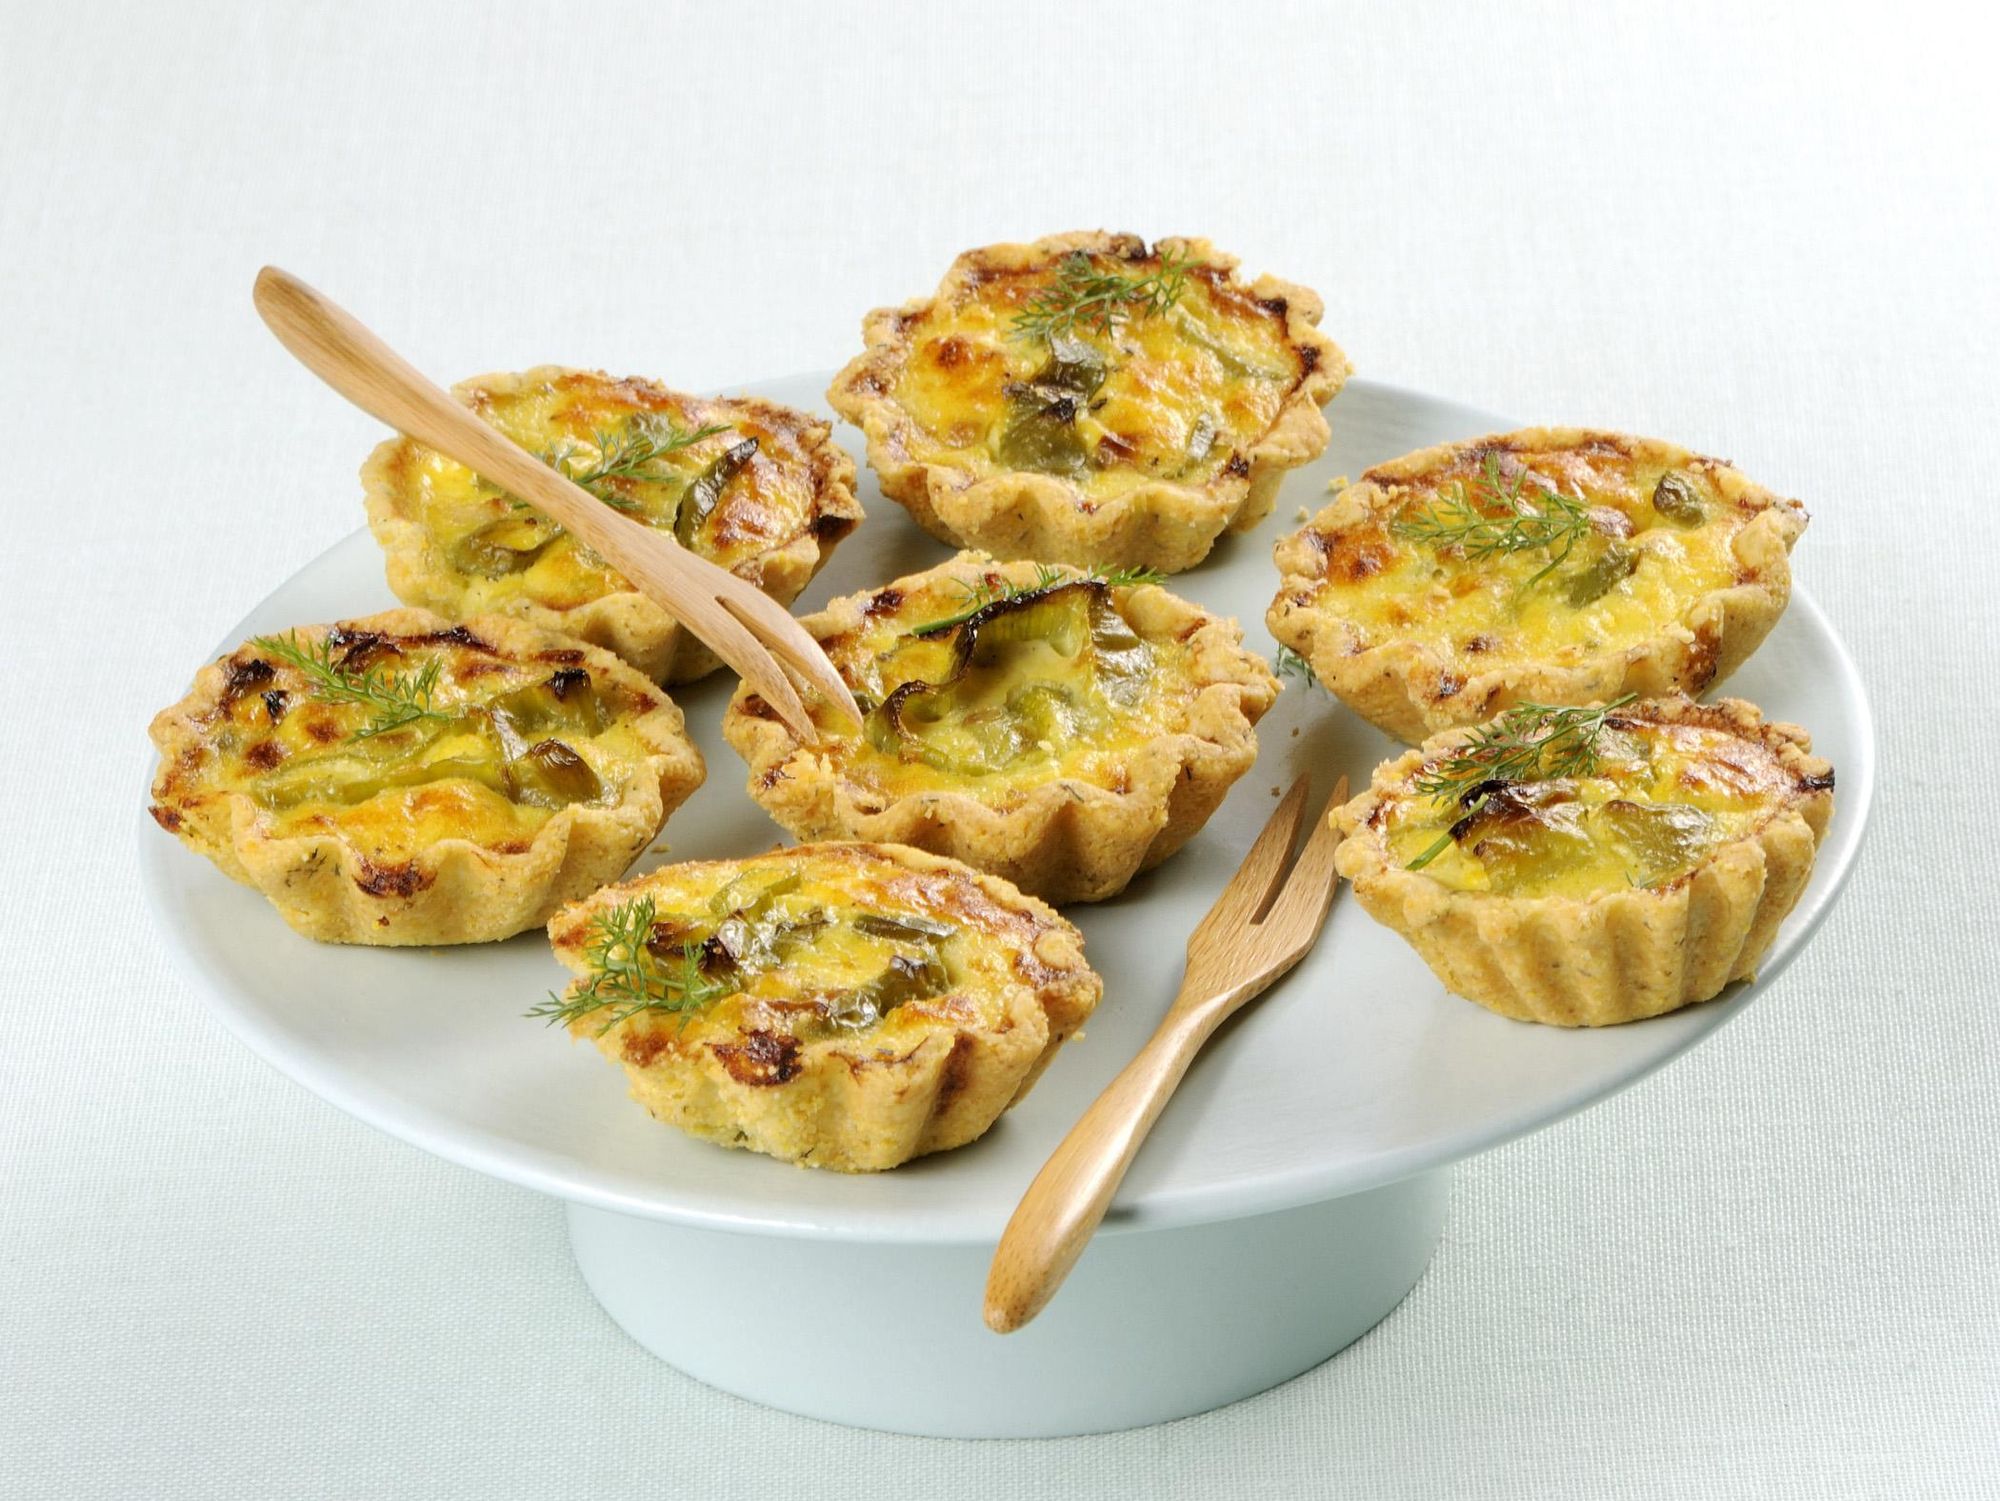 Corn tarts with dill and green chili